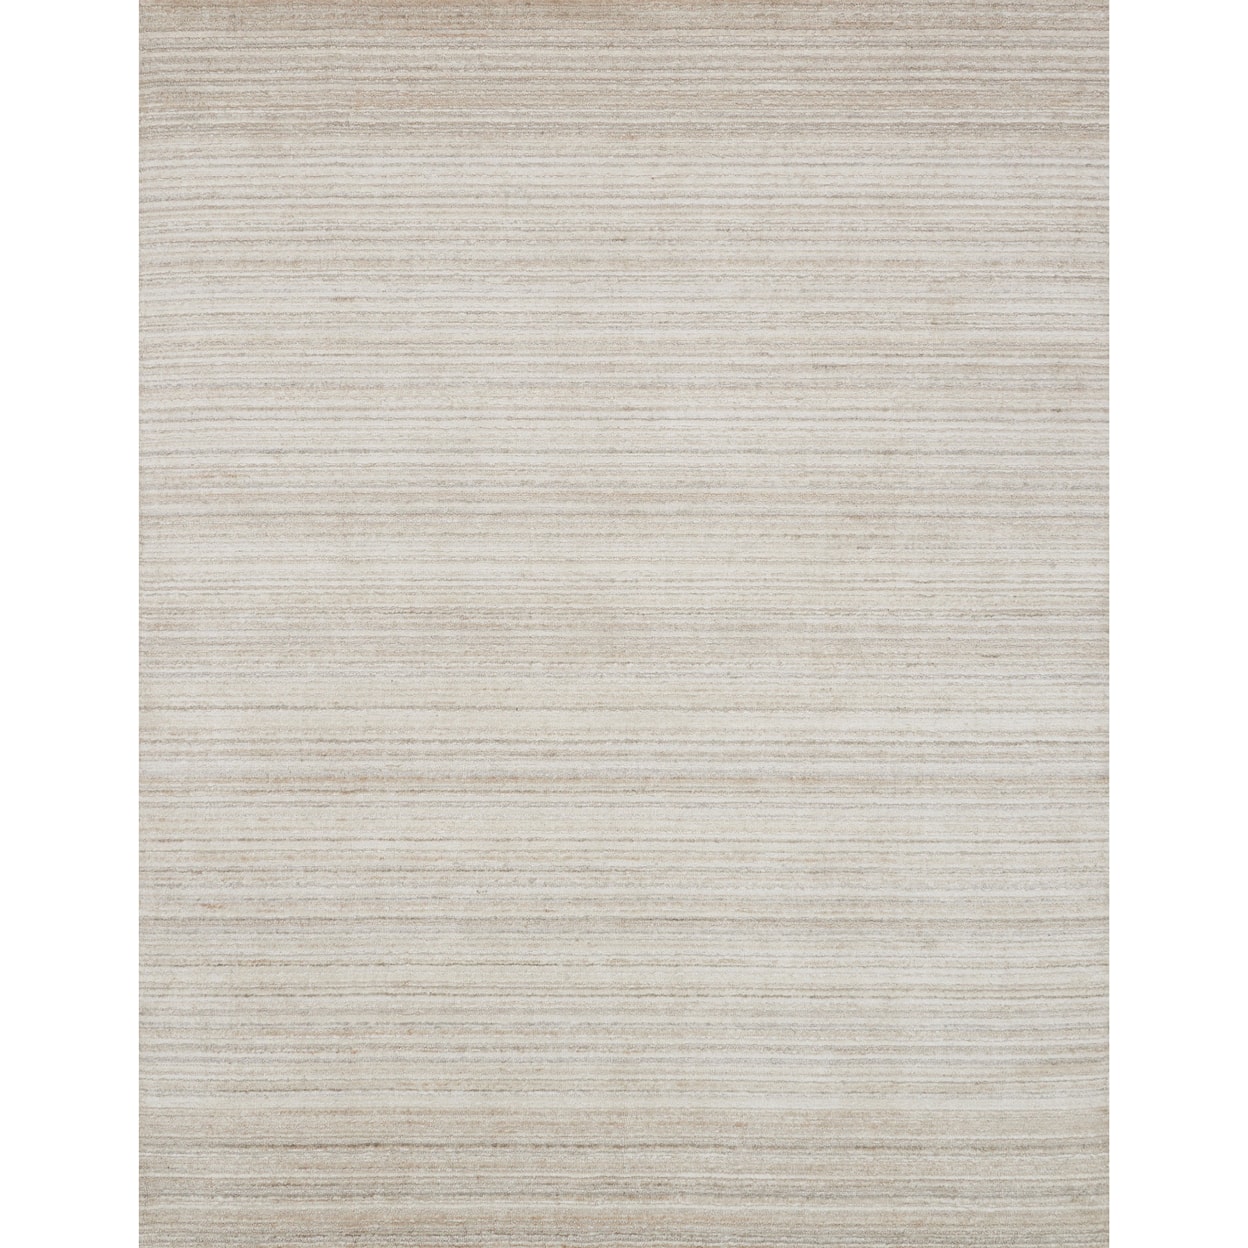 Reeds Rugs Haven 1'6" x 1'6"  Ivory / Natural Rug